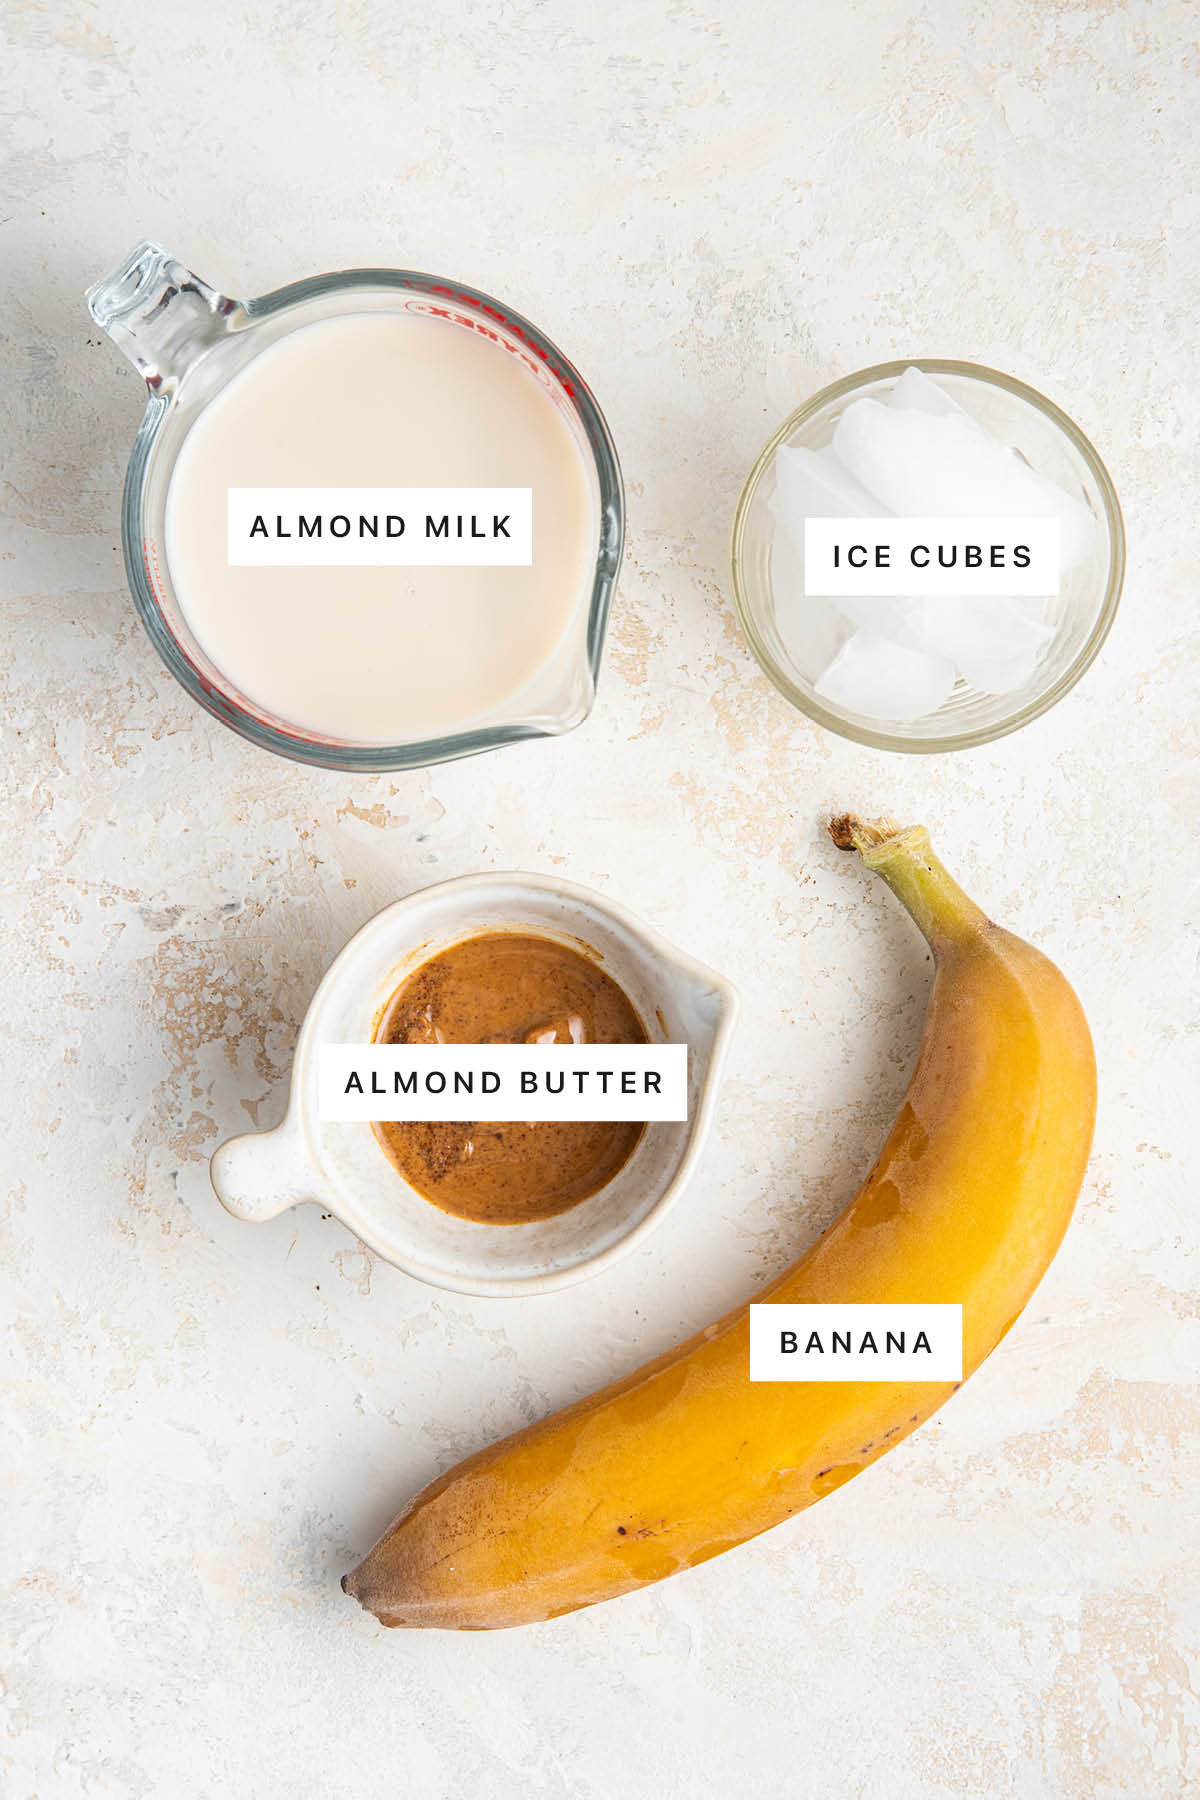 Ingredients measured out to make a Banana Almond Butter Smoothie: almond milk, ice cubes, almond butter and banana.